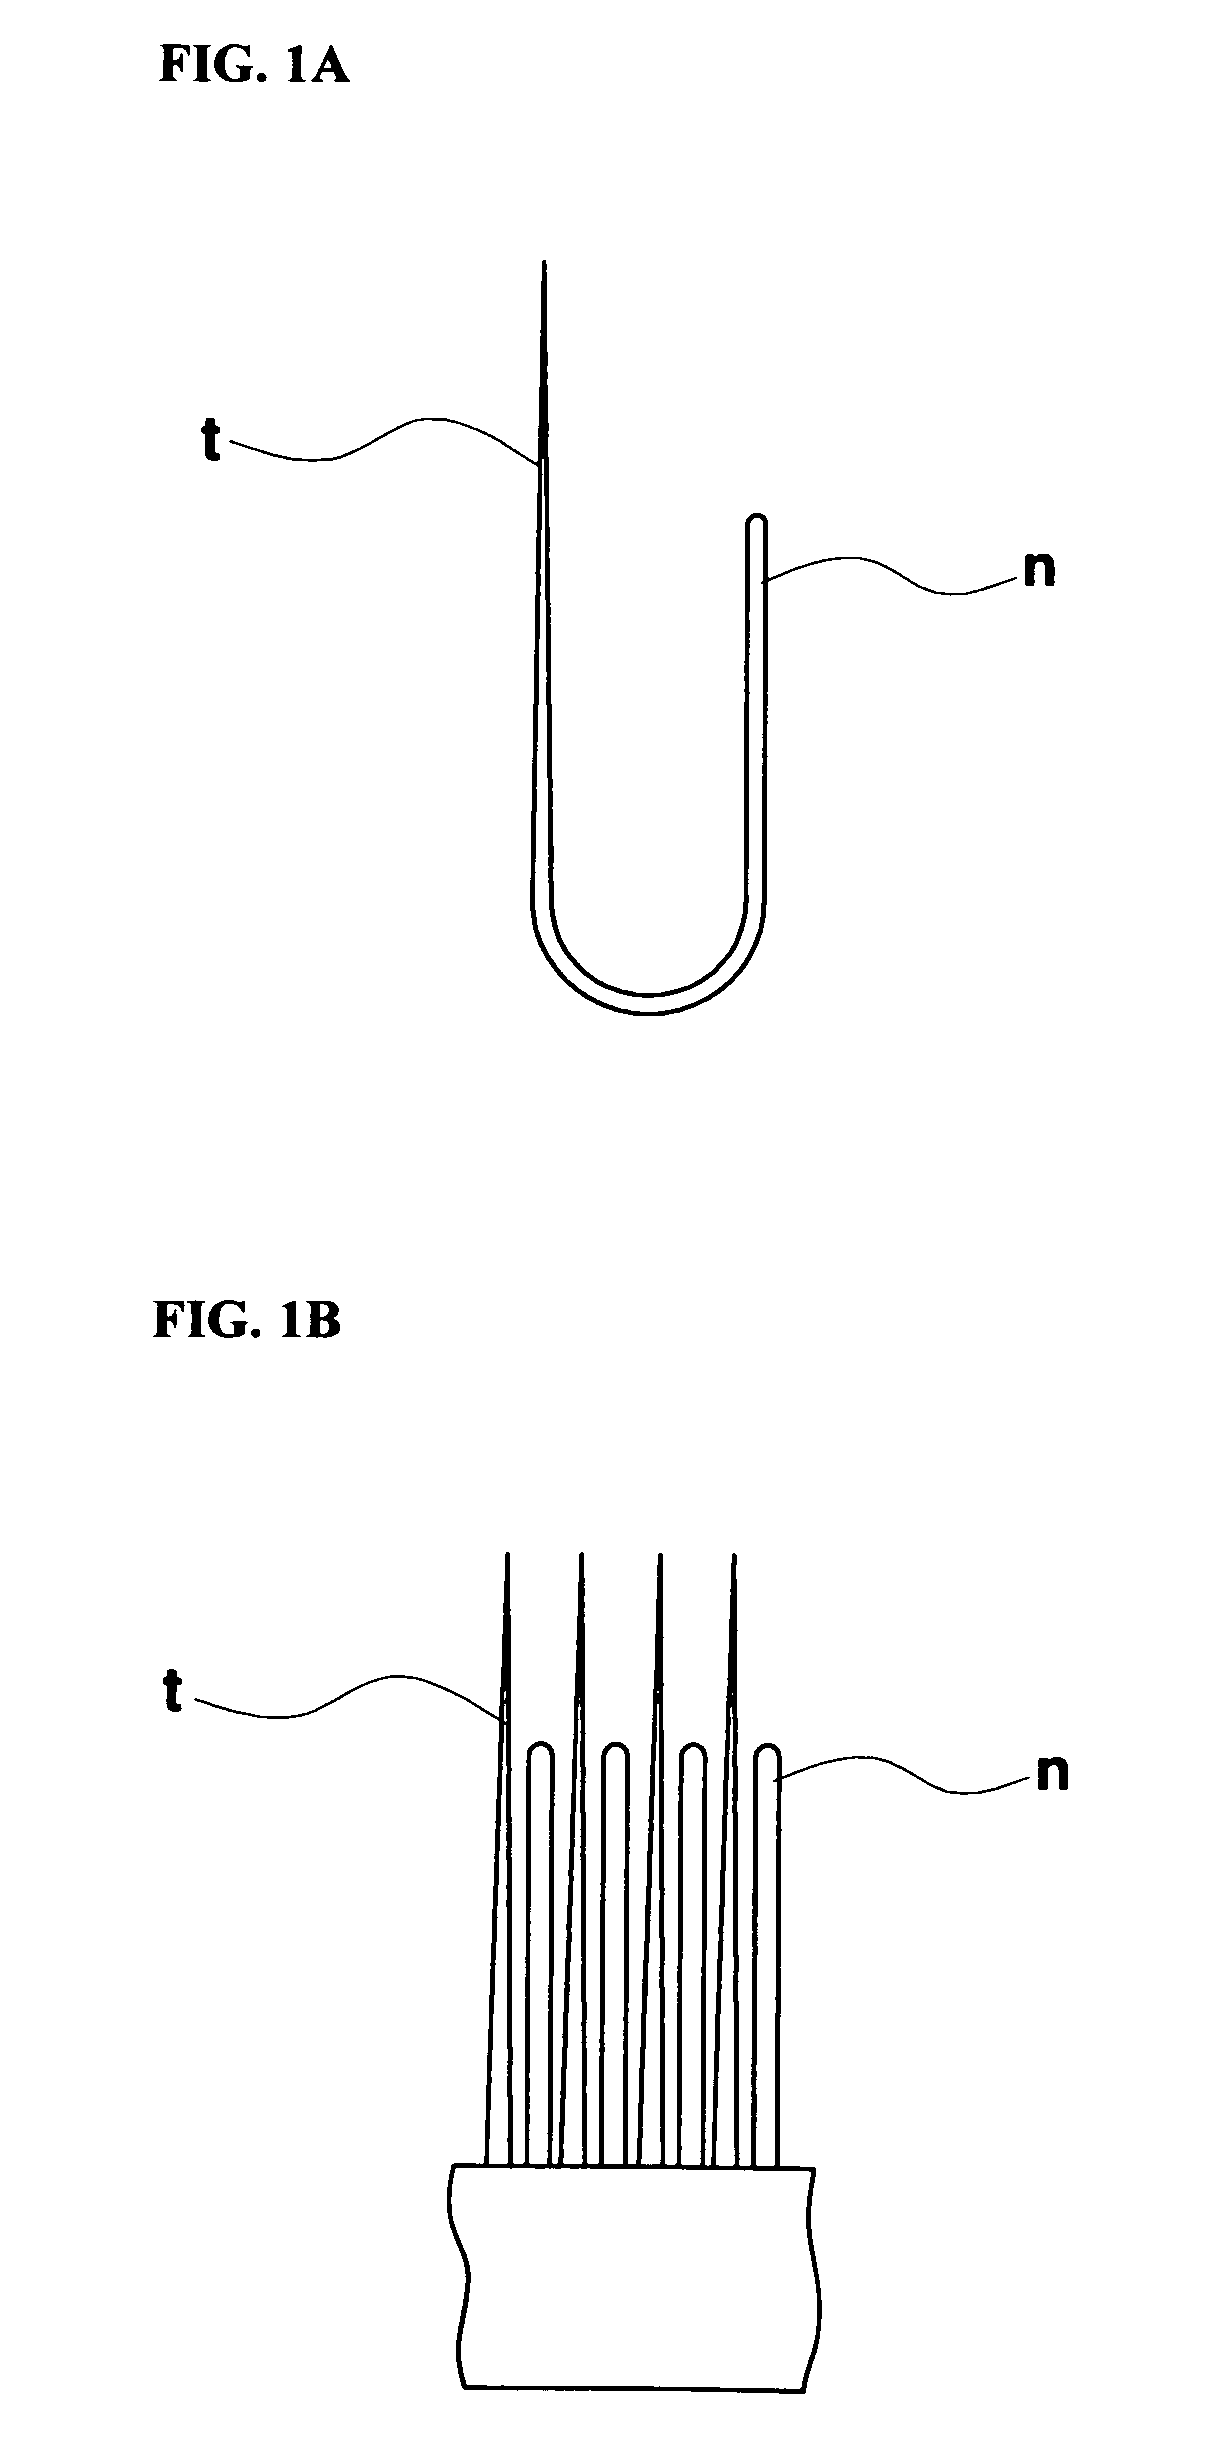 Toothbrush having needle-shaped bristle tapered at one end and manufacturing method thereof